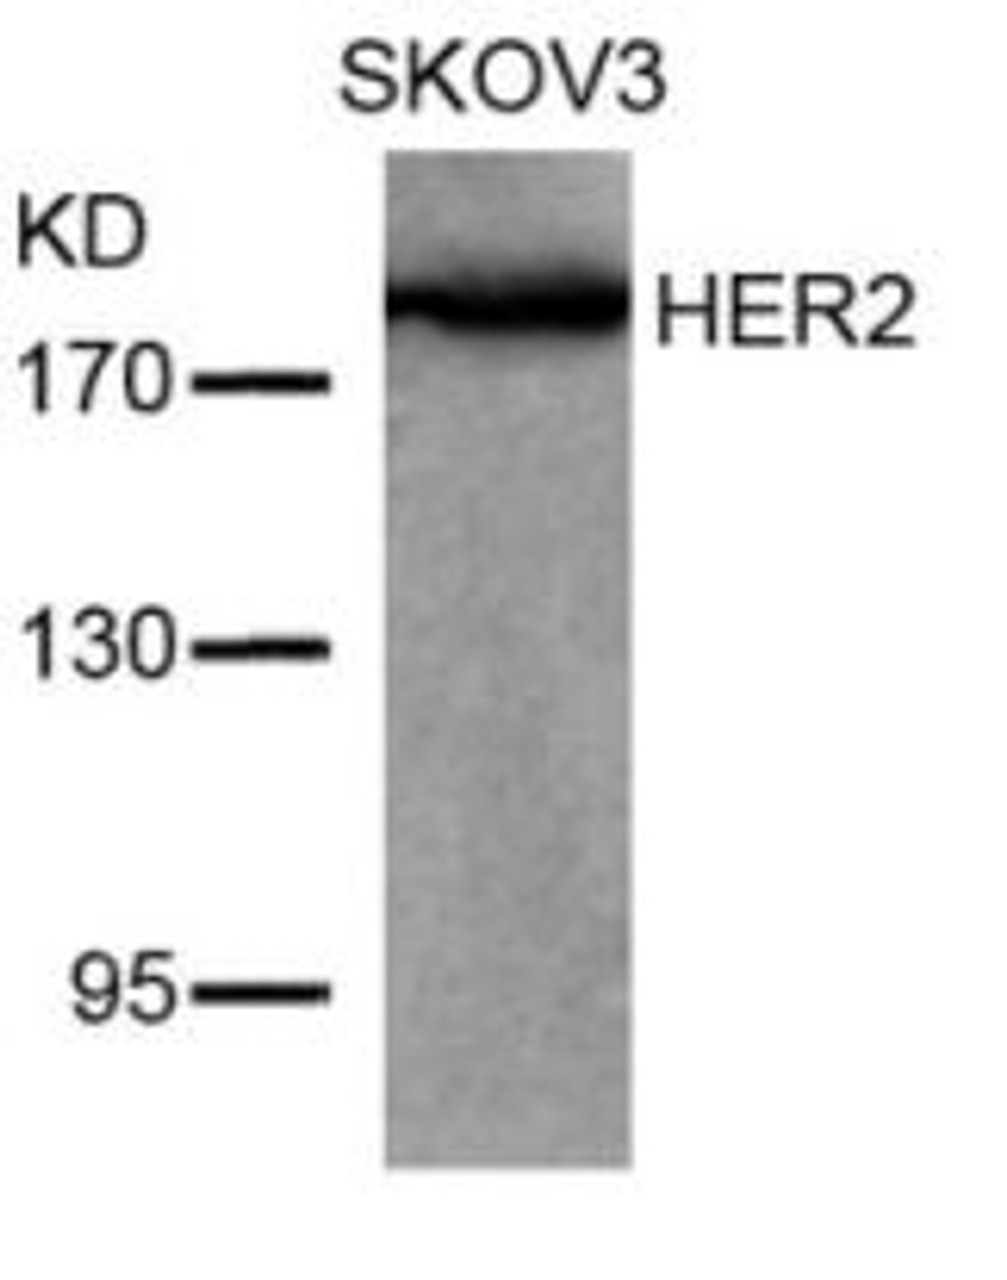 Western blot analysis of lysed extracts from SKOV3 cells using HER2 (Ab-877) .